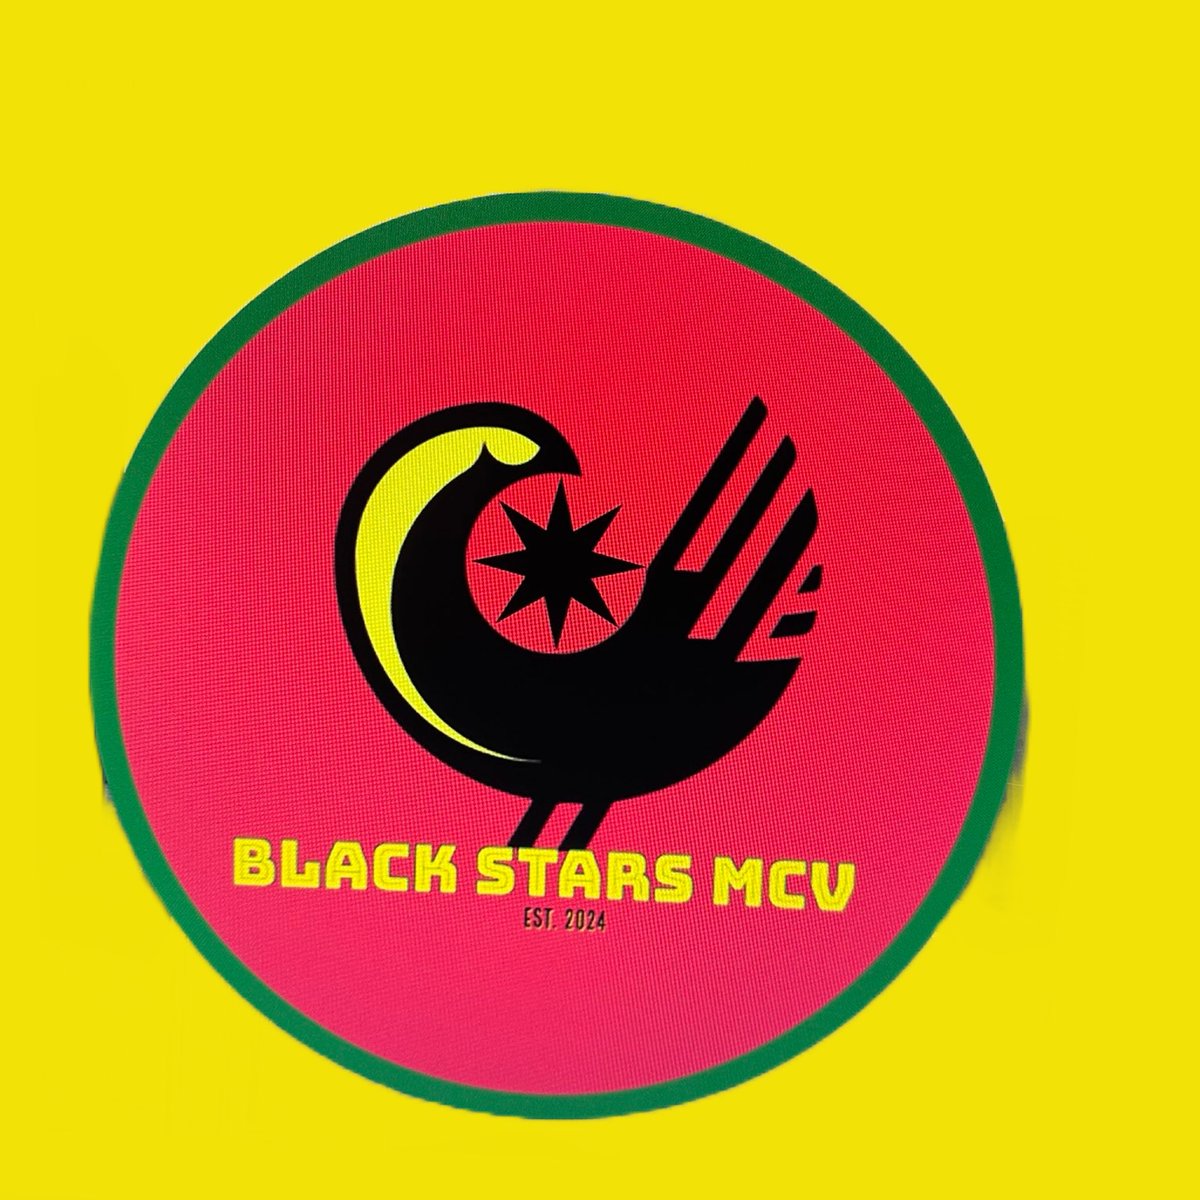 Sankofa Birds for unity, the Black Stars for diversity, and a feather for inclusivity. Let's celebrate unity in the game we love! @M_McDaniel2012 @blackstarsMCV
#BlackStar #FootballForAll #UnityInDiversity 🙌🏾🙌🏼🙌🏿
#SupporterGroup #CityParkFun #SoccerFans #Community #Diversity…